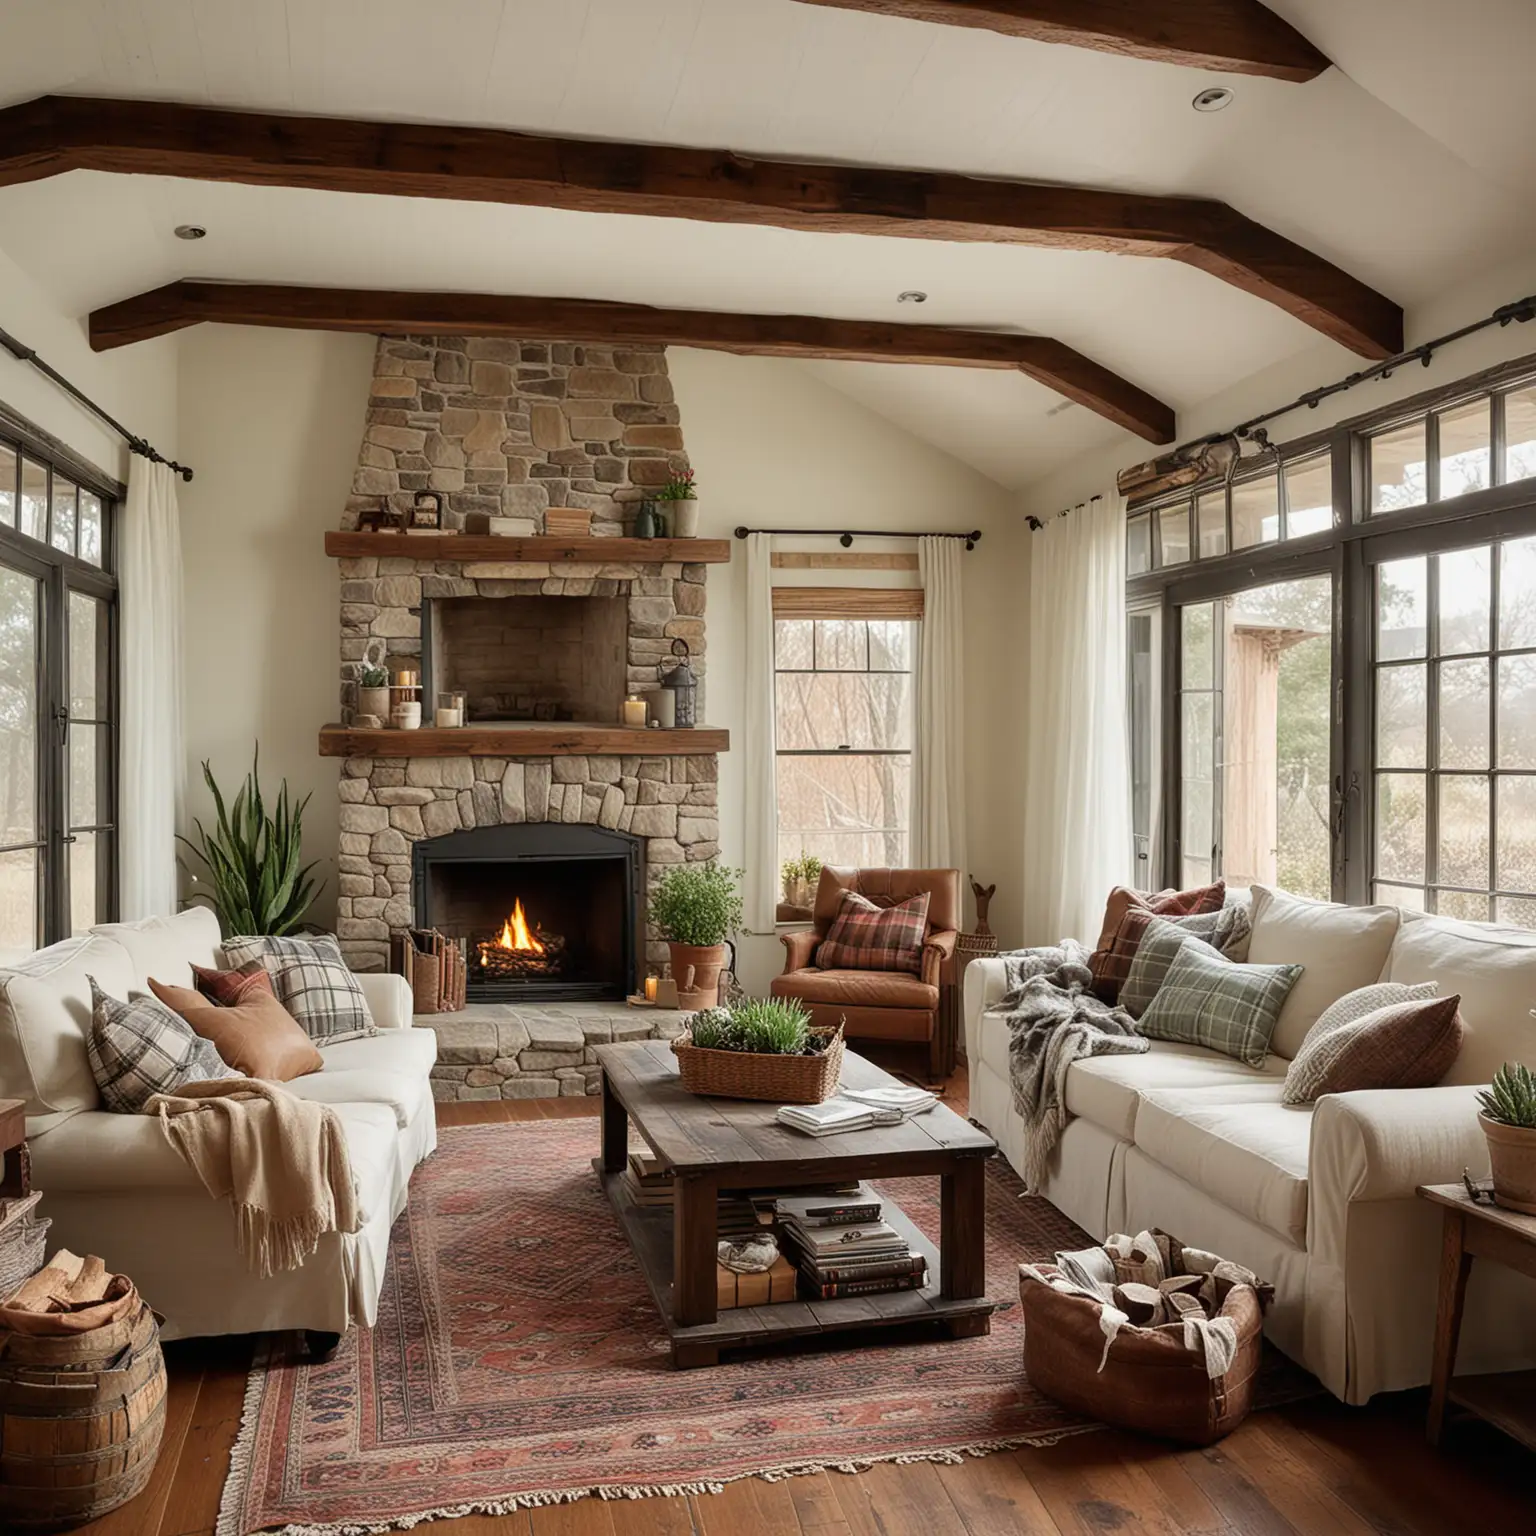 A spacious farmhouse living room with exposed wooden beams on the ceiling, wide plank wooden floors, and a large stone fireplace. The room features a mix of vintage furniture, including a distressed leather sofa with plaid throw pillows and a wooden coffee table decorated with a vintage lantern and a stack of old books. Tall windows with white linen curtains let in natural light, and a sliding barn door adds to the rustic charm. Wicker baskets filled with knitted blankets sit beside the fireplace, and potted succulents and greenery add a fresh touch.